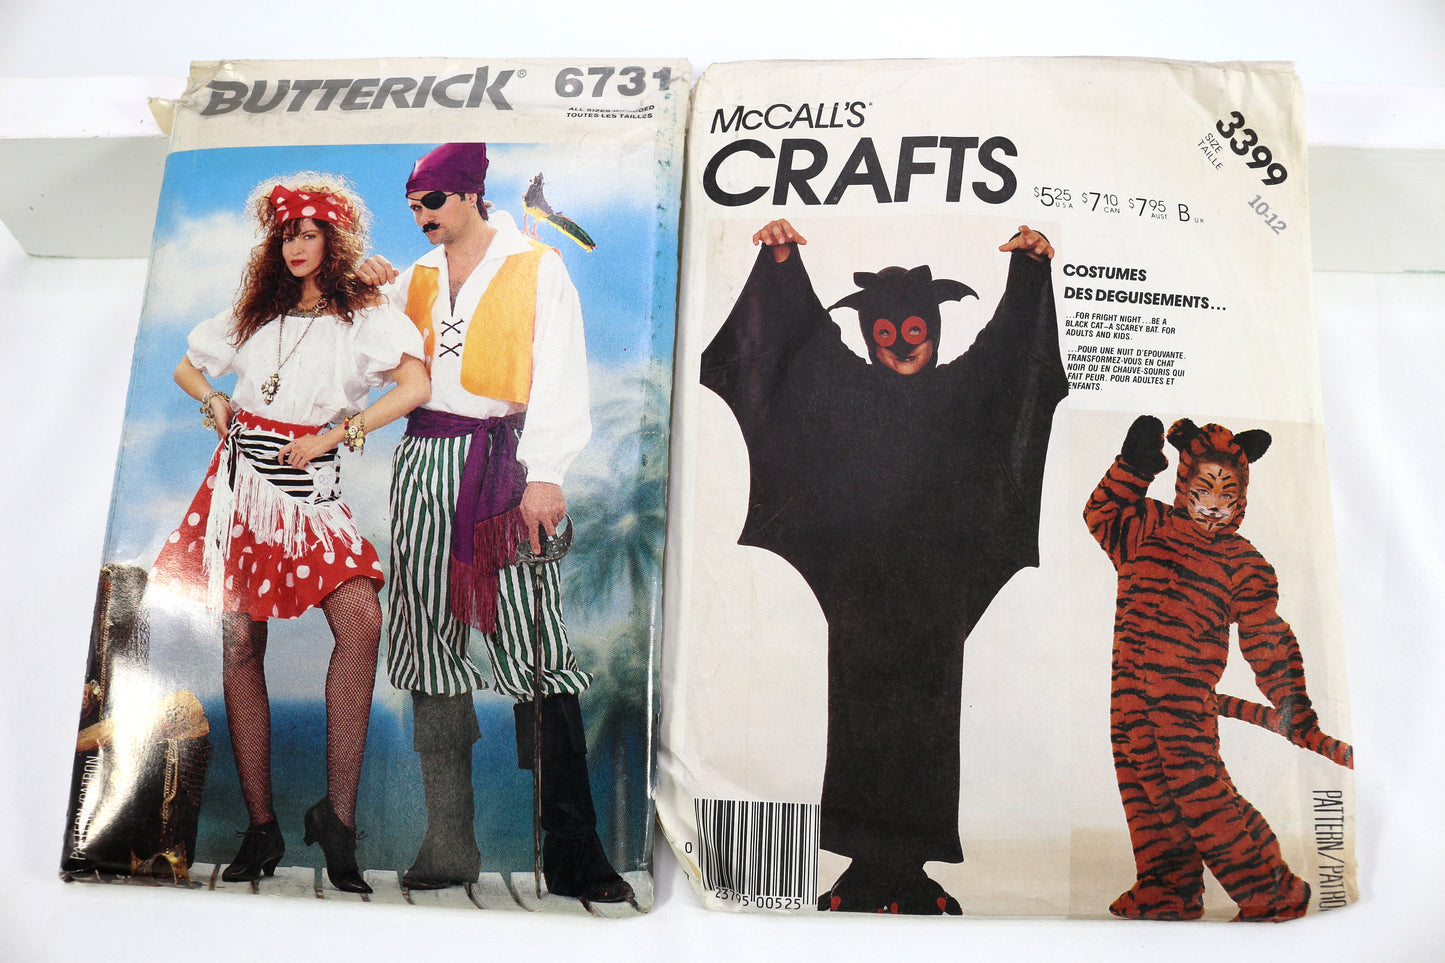 McCall's 3399 Costume Sewing Pattern or Butterick 6731 Pirate Costume Pattern